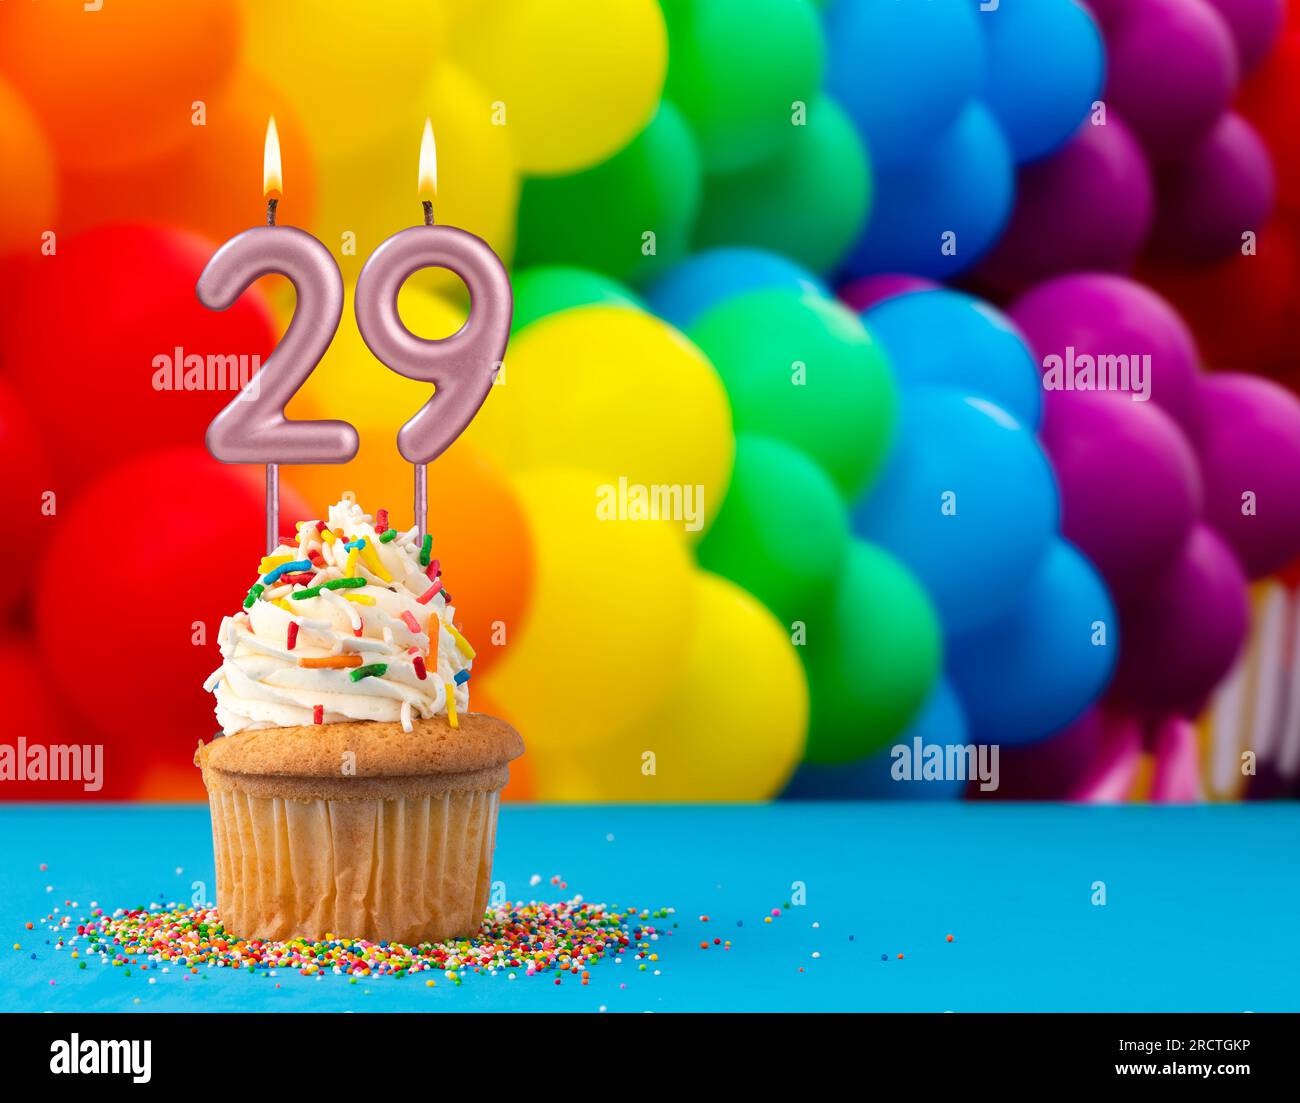 Birthday candle number 29 - Invitation card with balloons in colors of the gay pride march Stock Photo